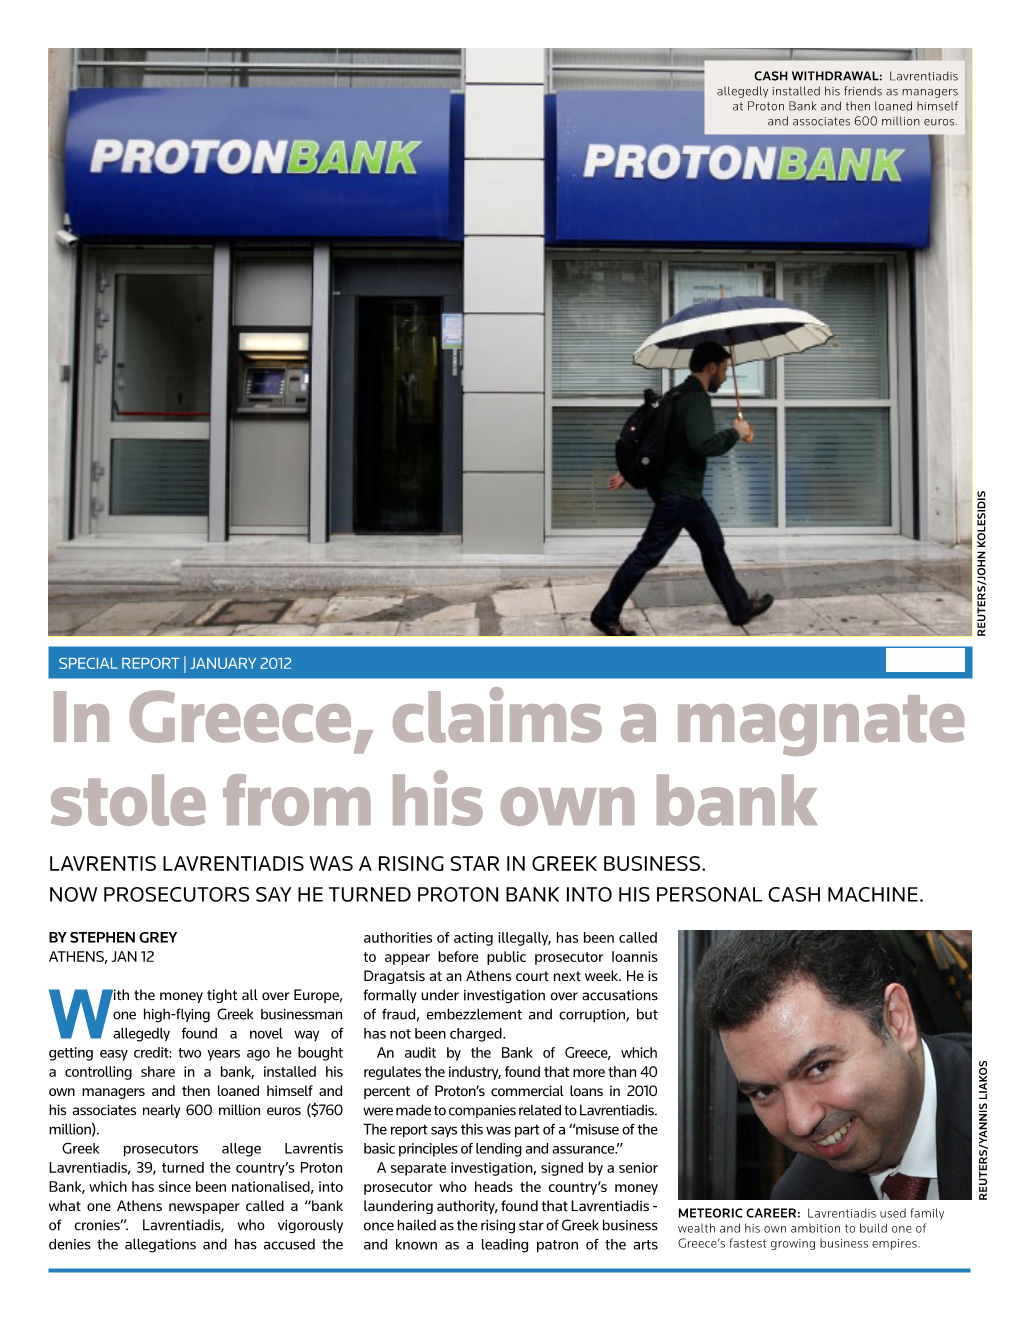 In Greece, Claims a Magnate Stole from His Own Bank Lavrentis Lavrentiadis Was a Rising Star in Greek Business